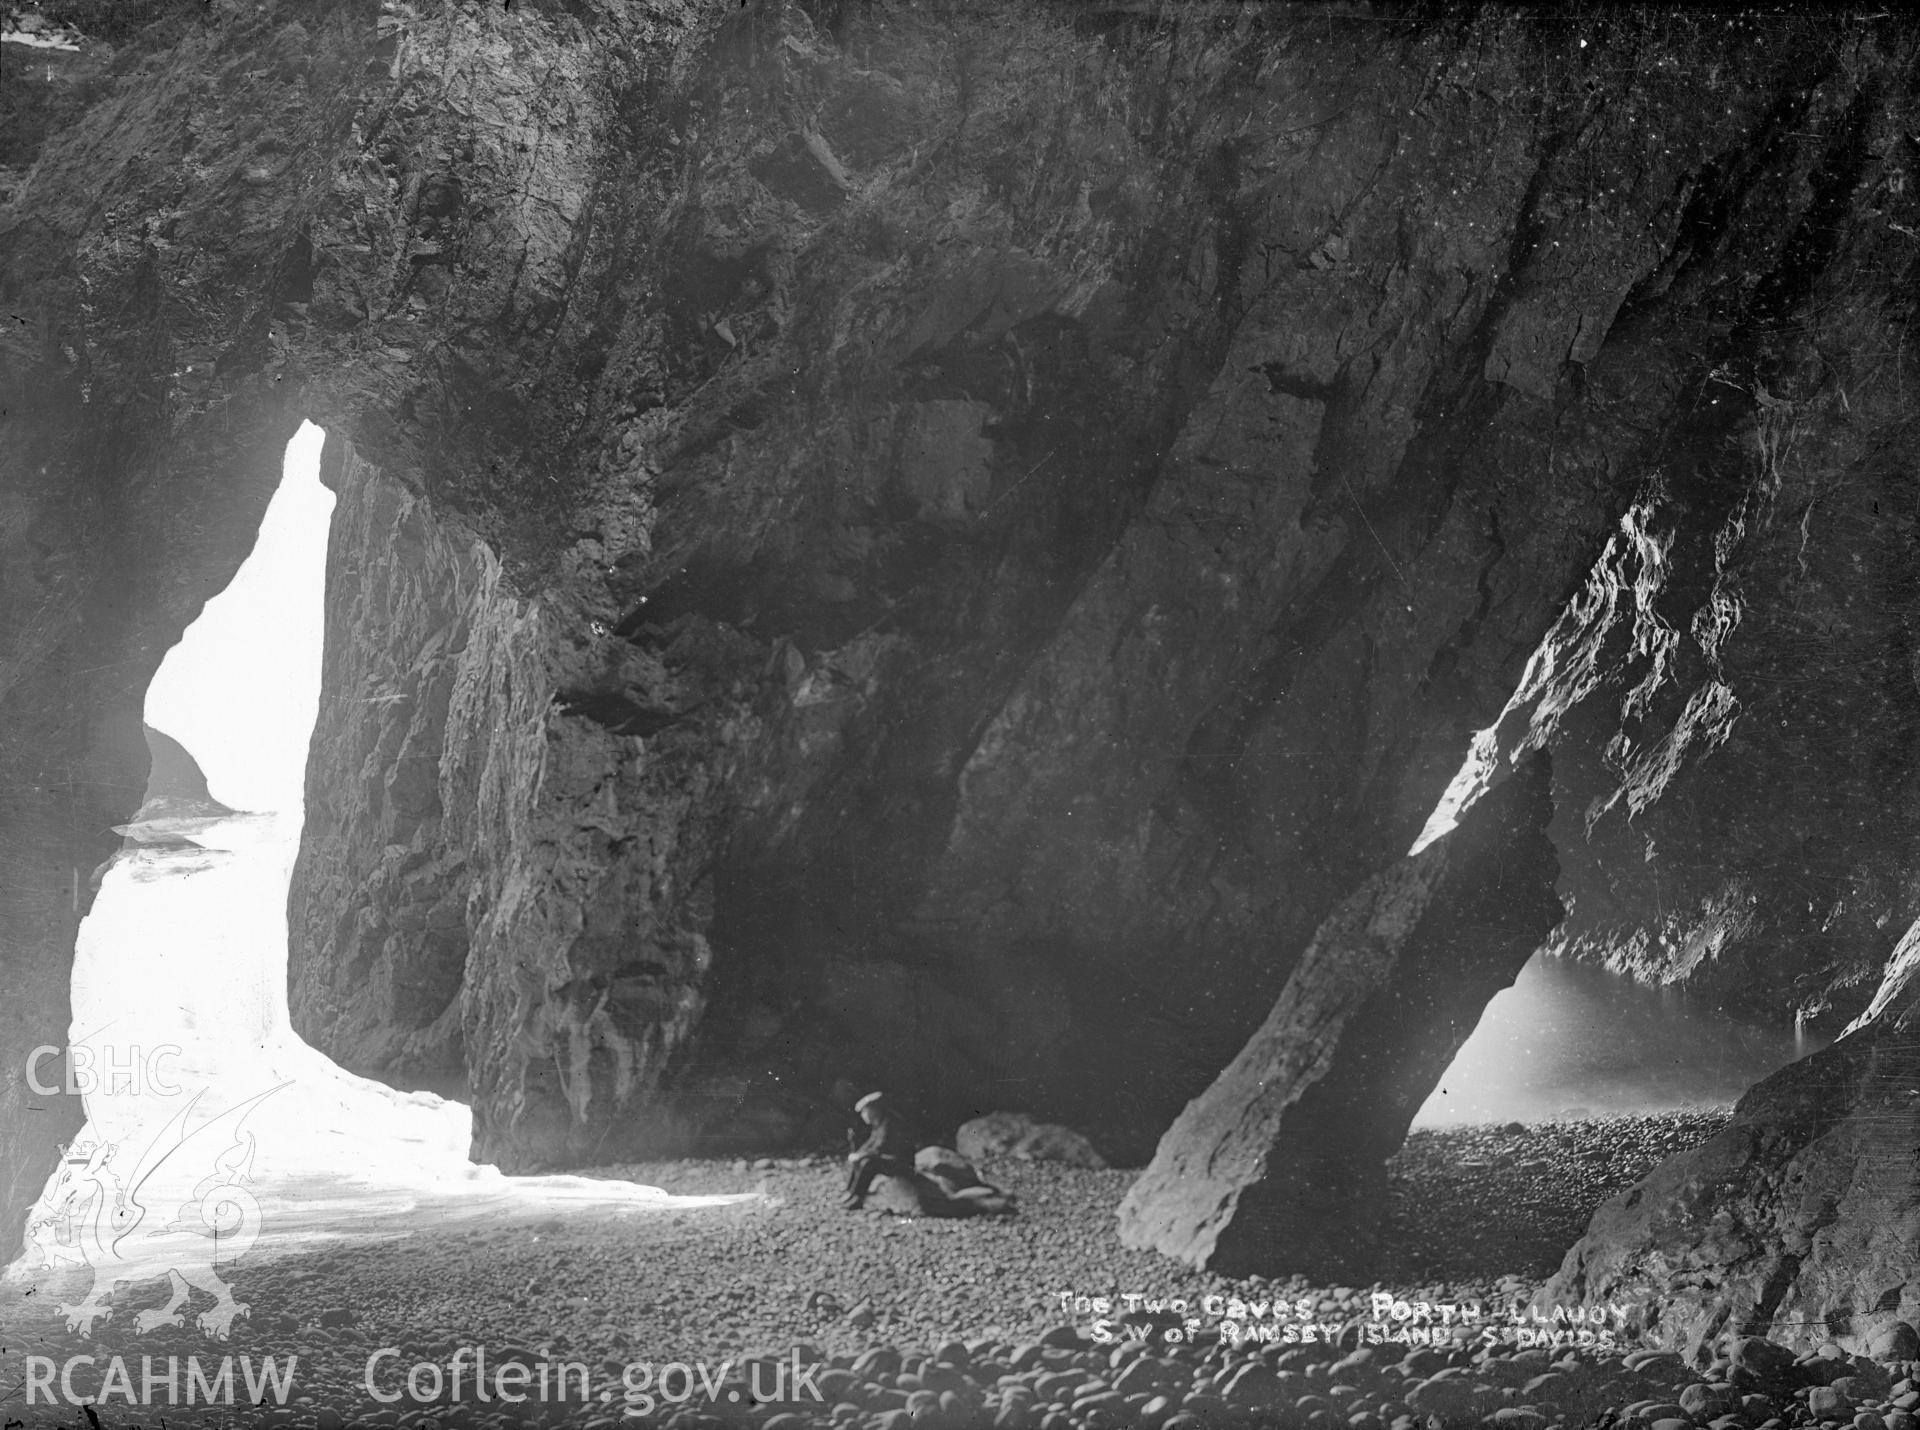 Black and white glass negative showing "The Two Caves at Porth-Llauoy SW of Ramsey Island, St Davids" Porth Lleuog, Ramsey Island.